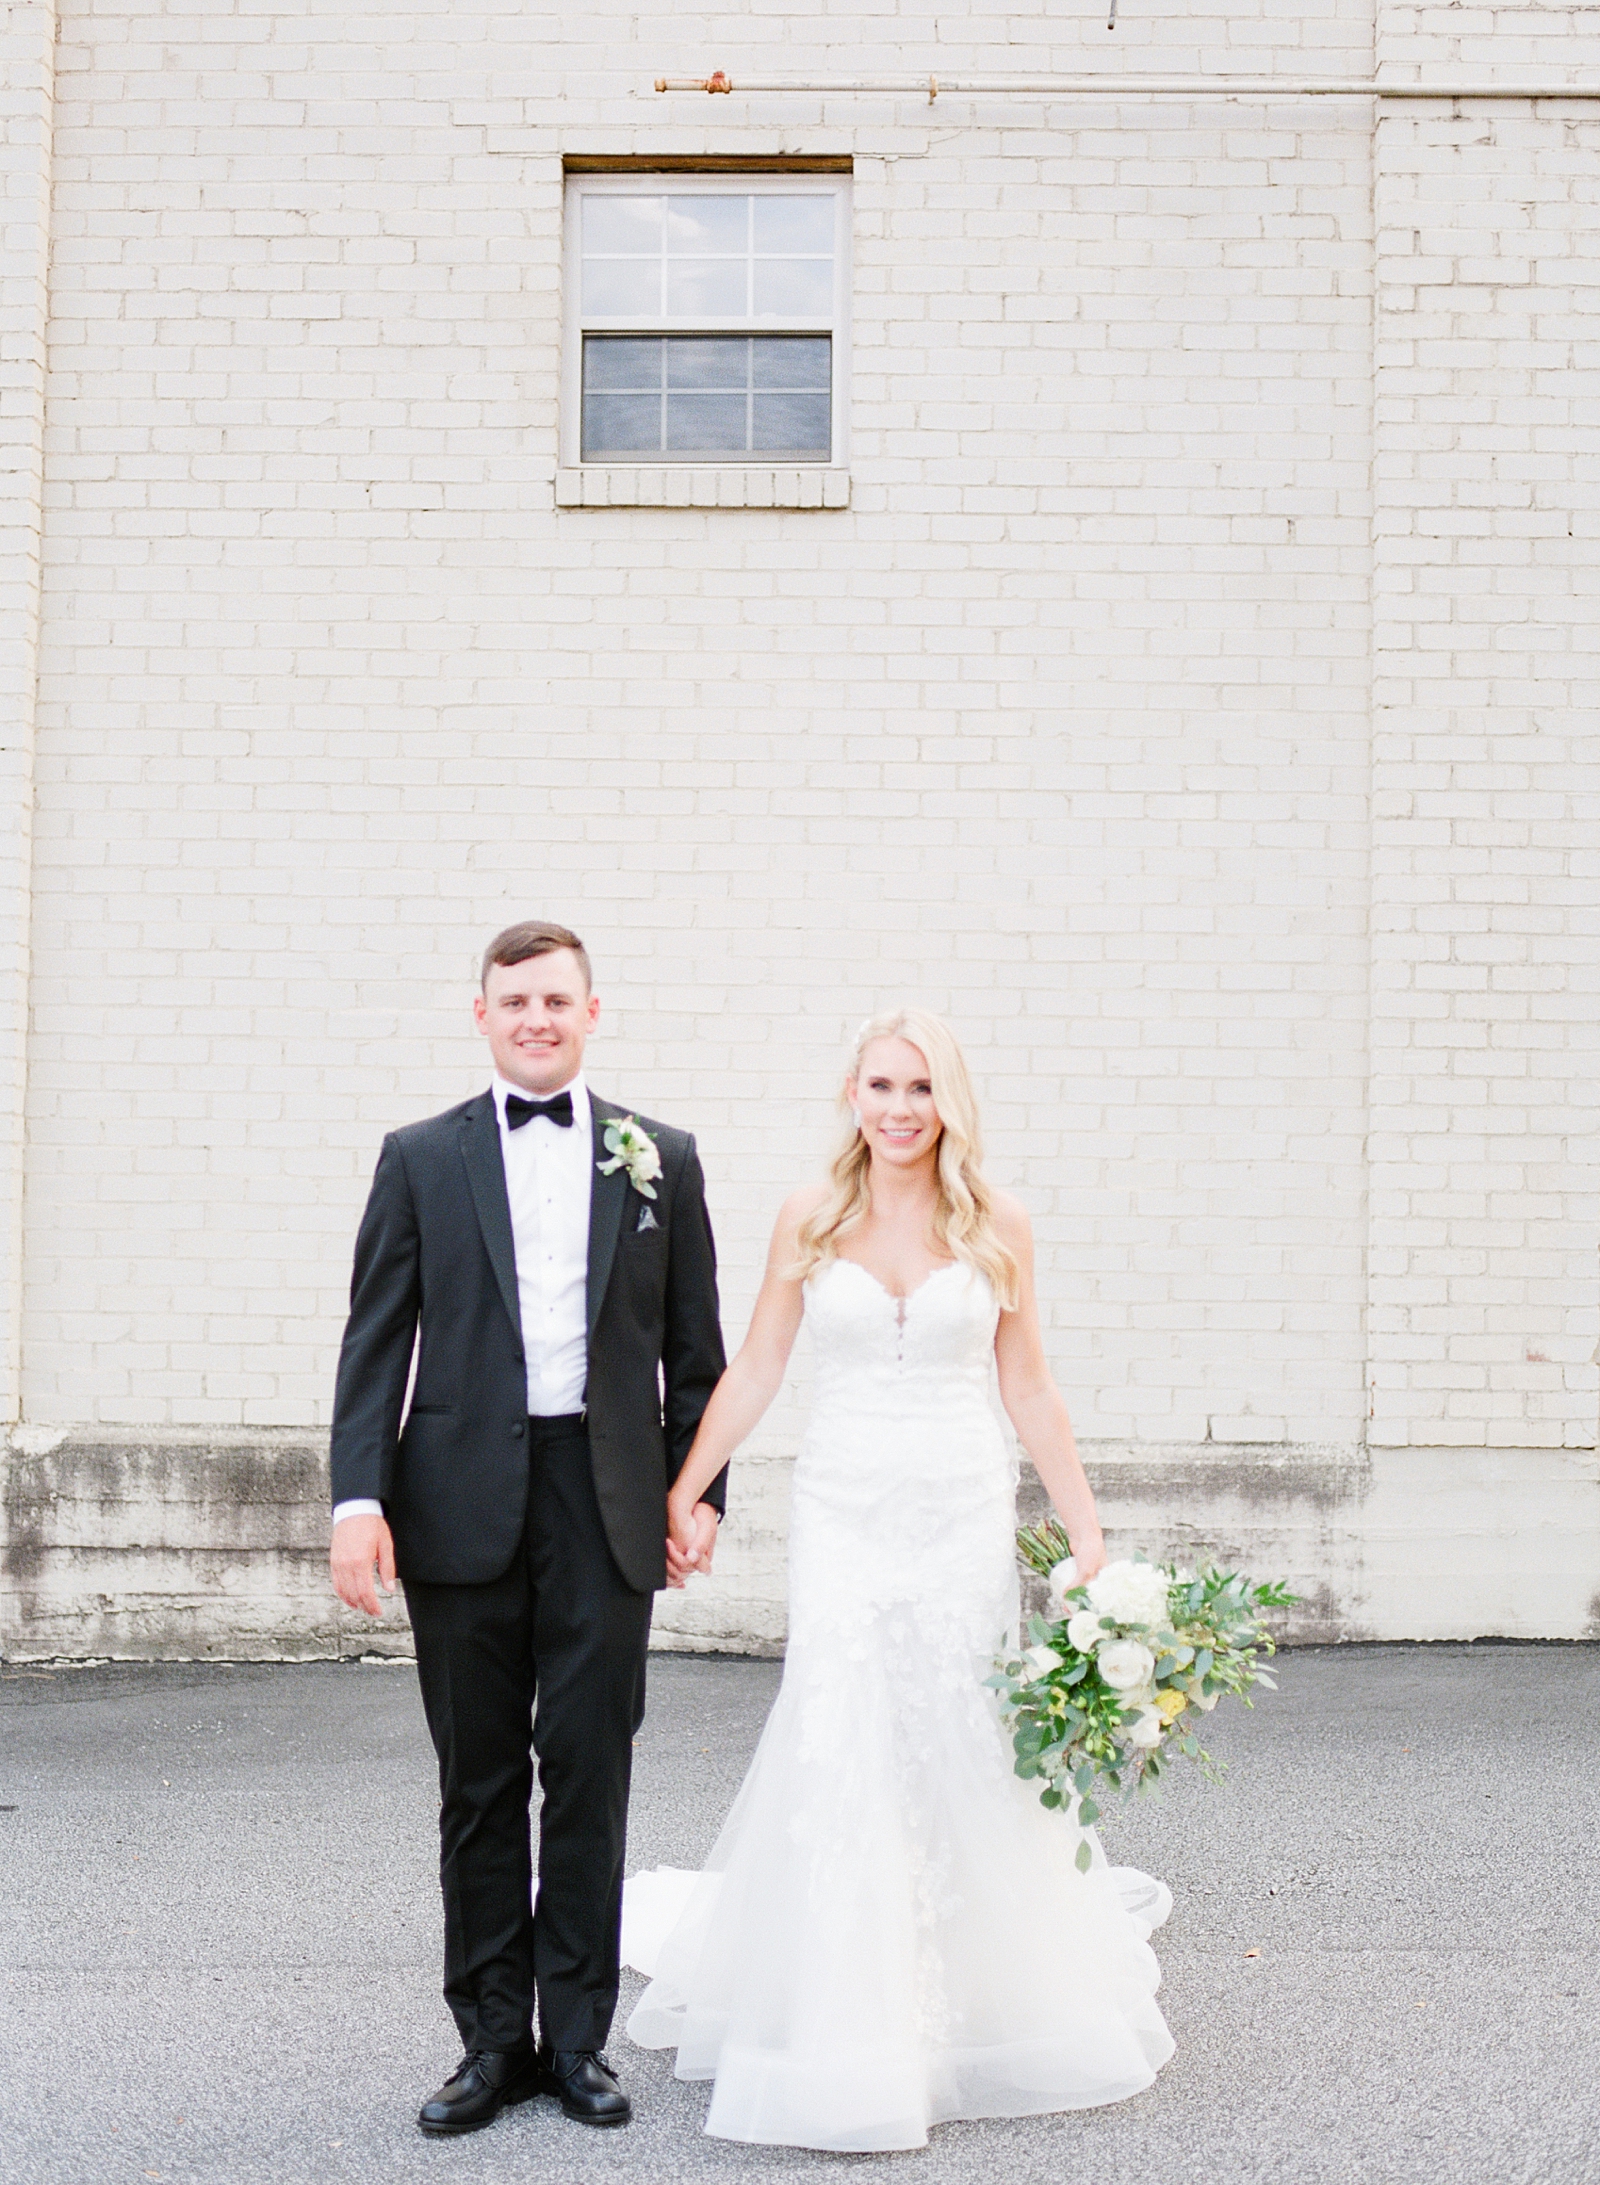 Glover Park Brewery Wedding Bride and Groom Holding Hands Smiling at Camera Photo